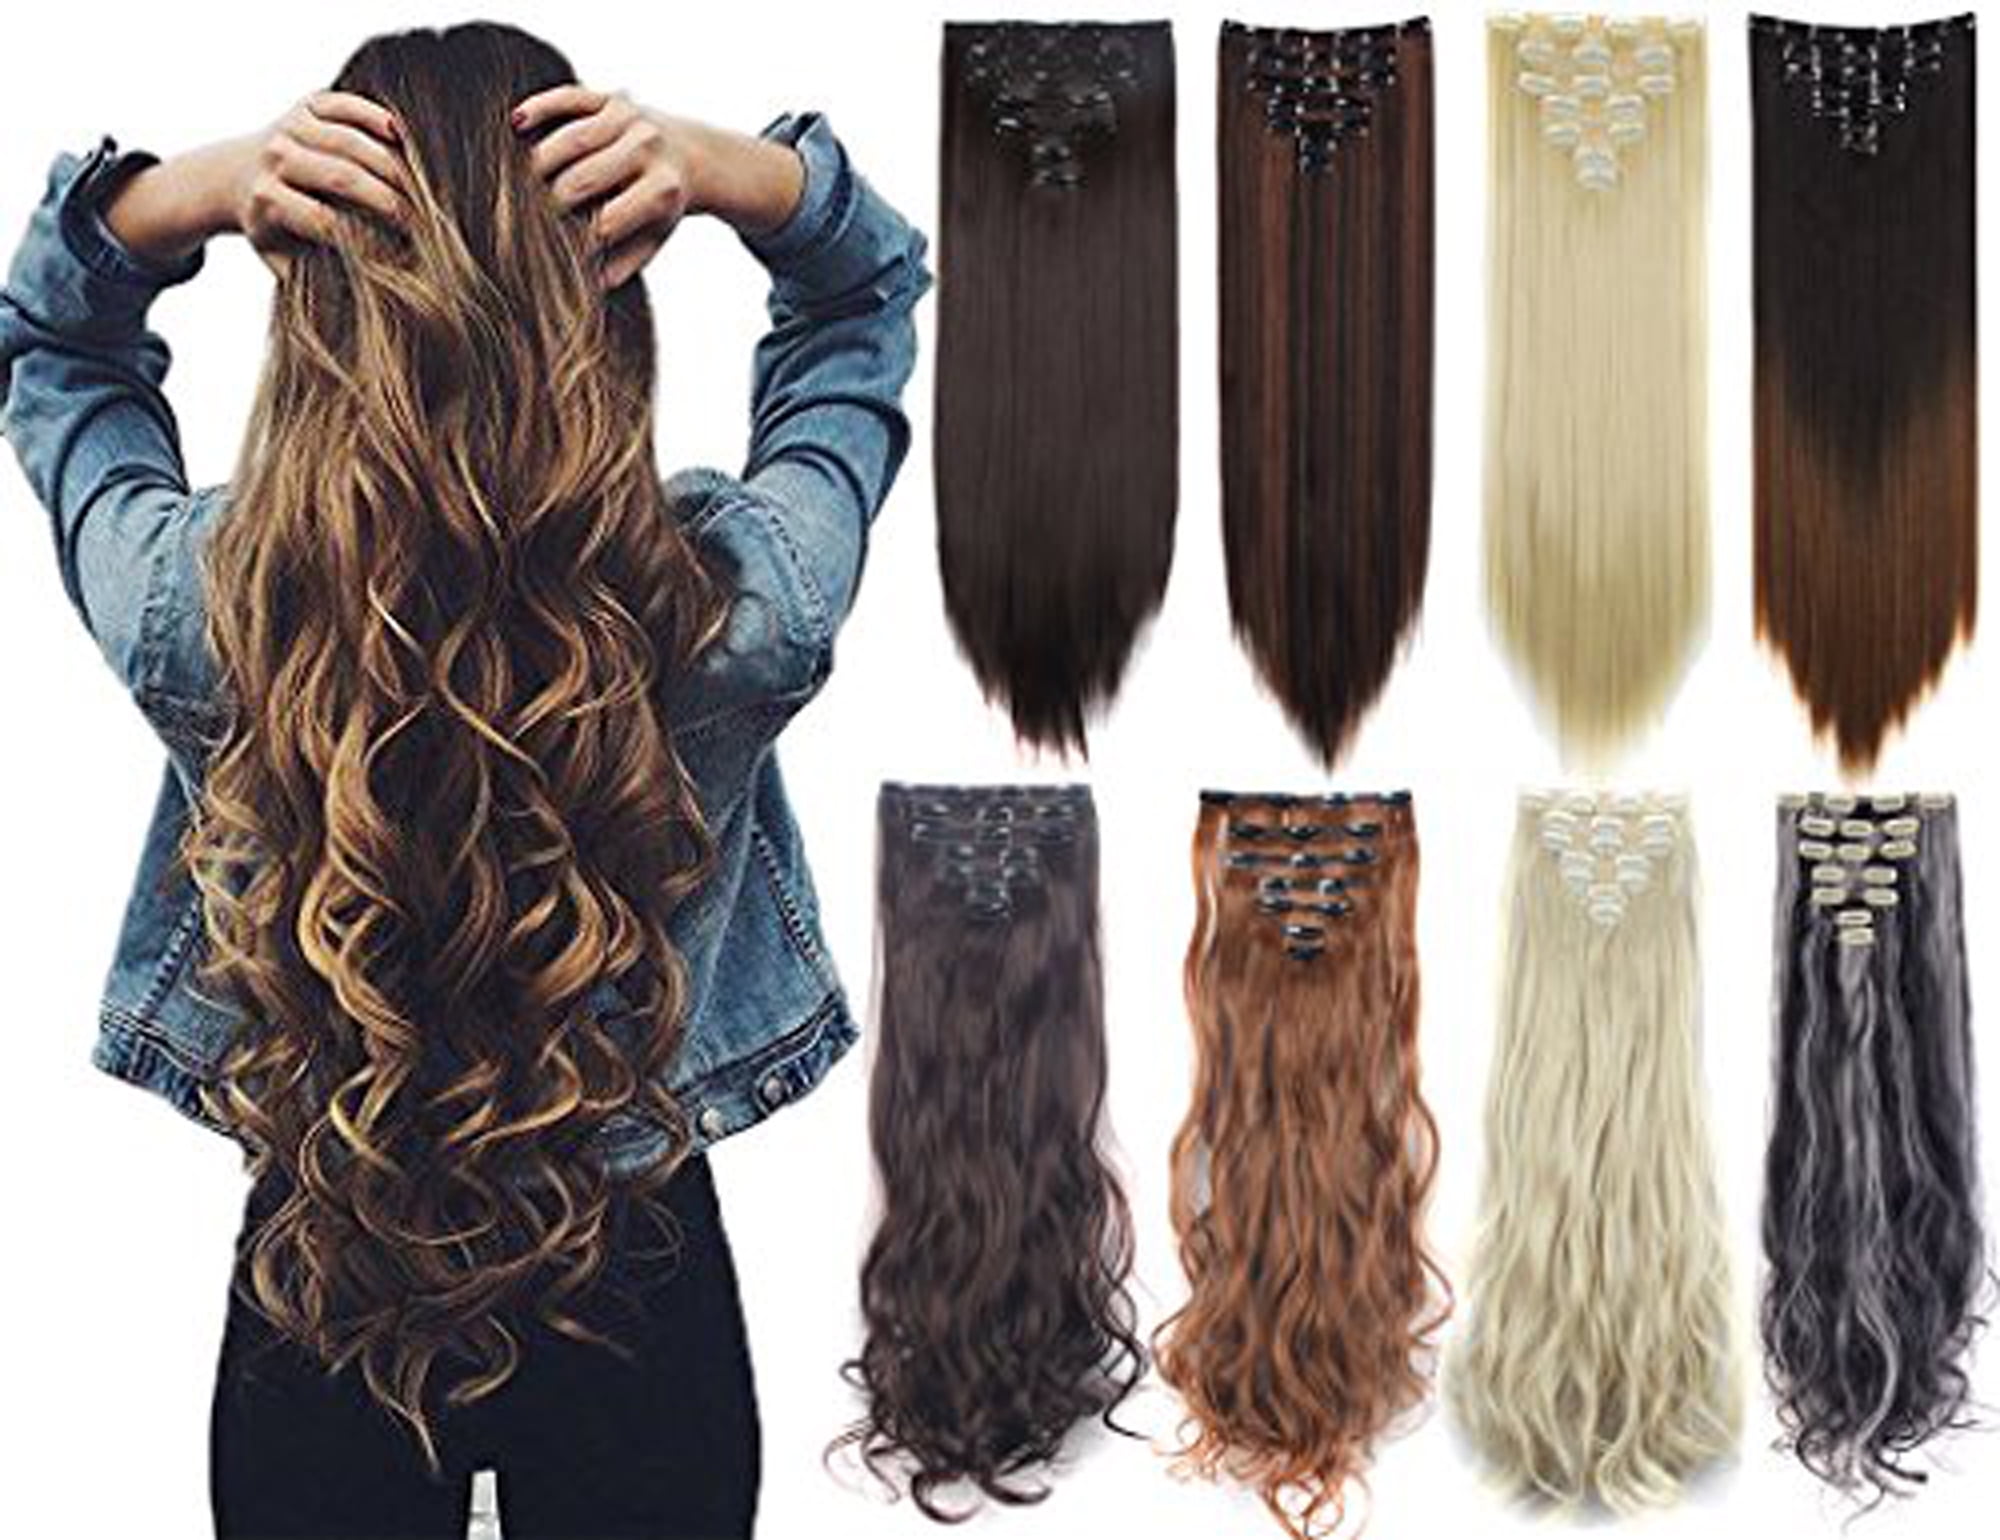 18 Wavy Curly Clip in Hair Extensions 4 PCS 11Clips Hair Extensions Synthetic Fiber Full Head Clip in on Hair Extensions Clip on Double Weft for Women Girls Ash Blonde Mix Bleach Blonde